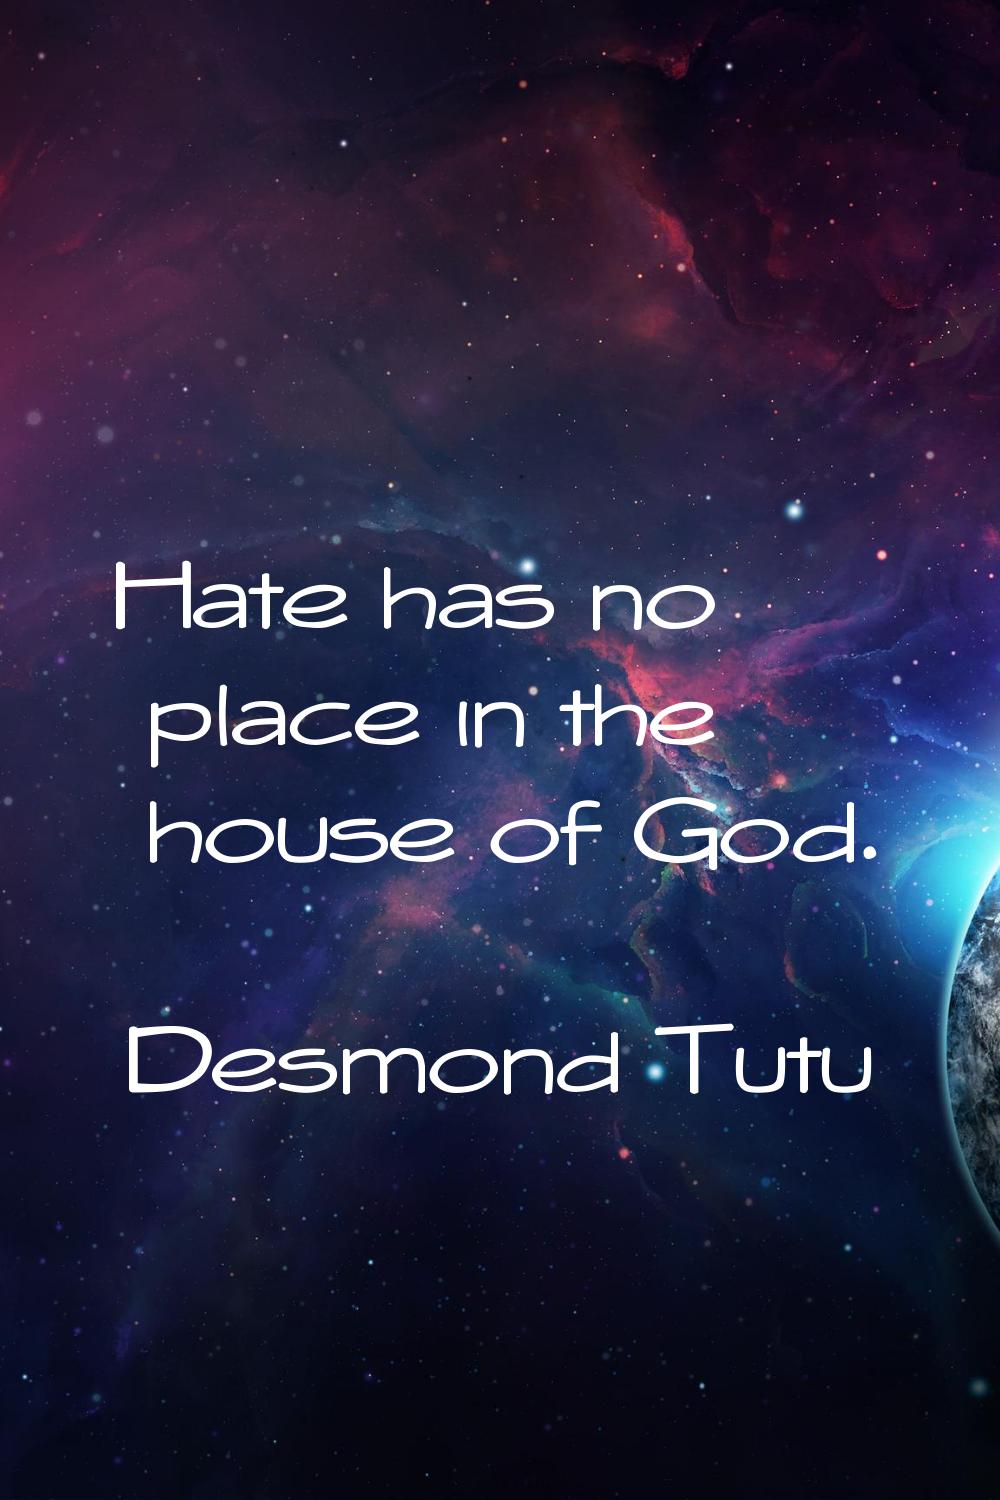 Hate has no place in the house of God.